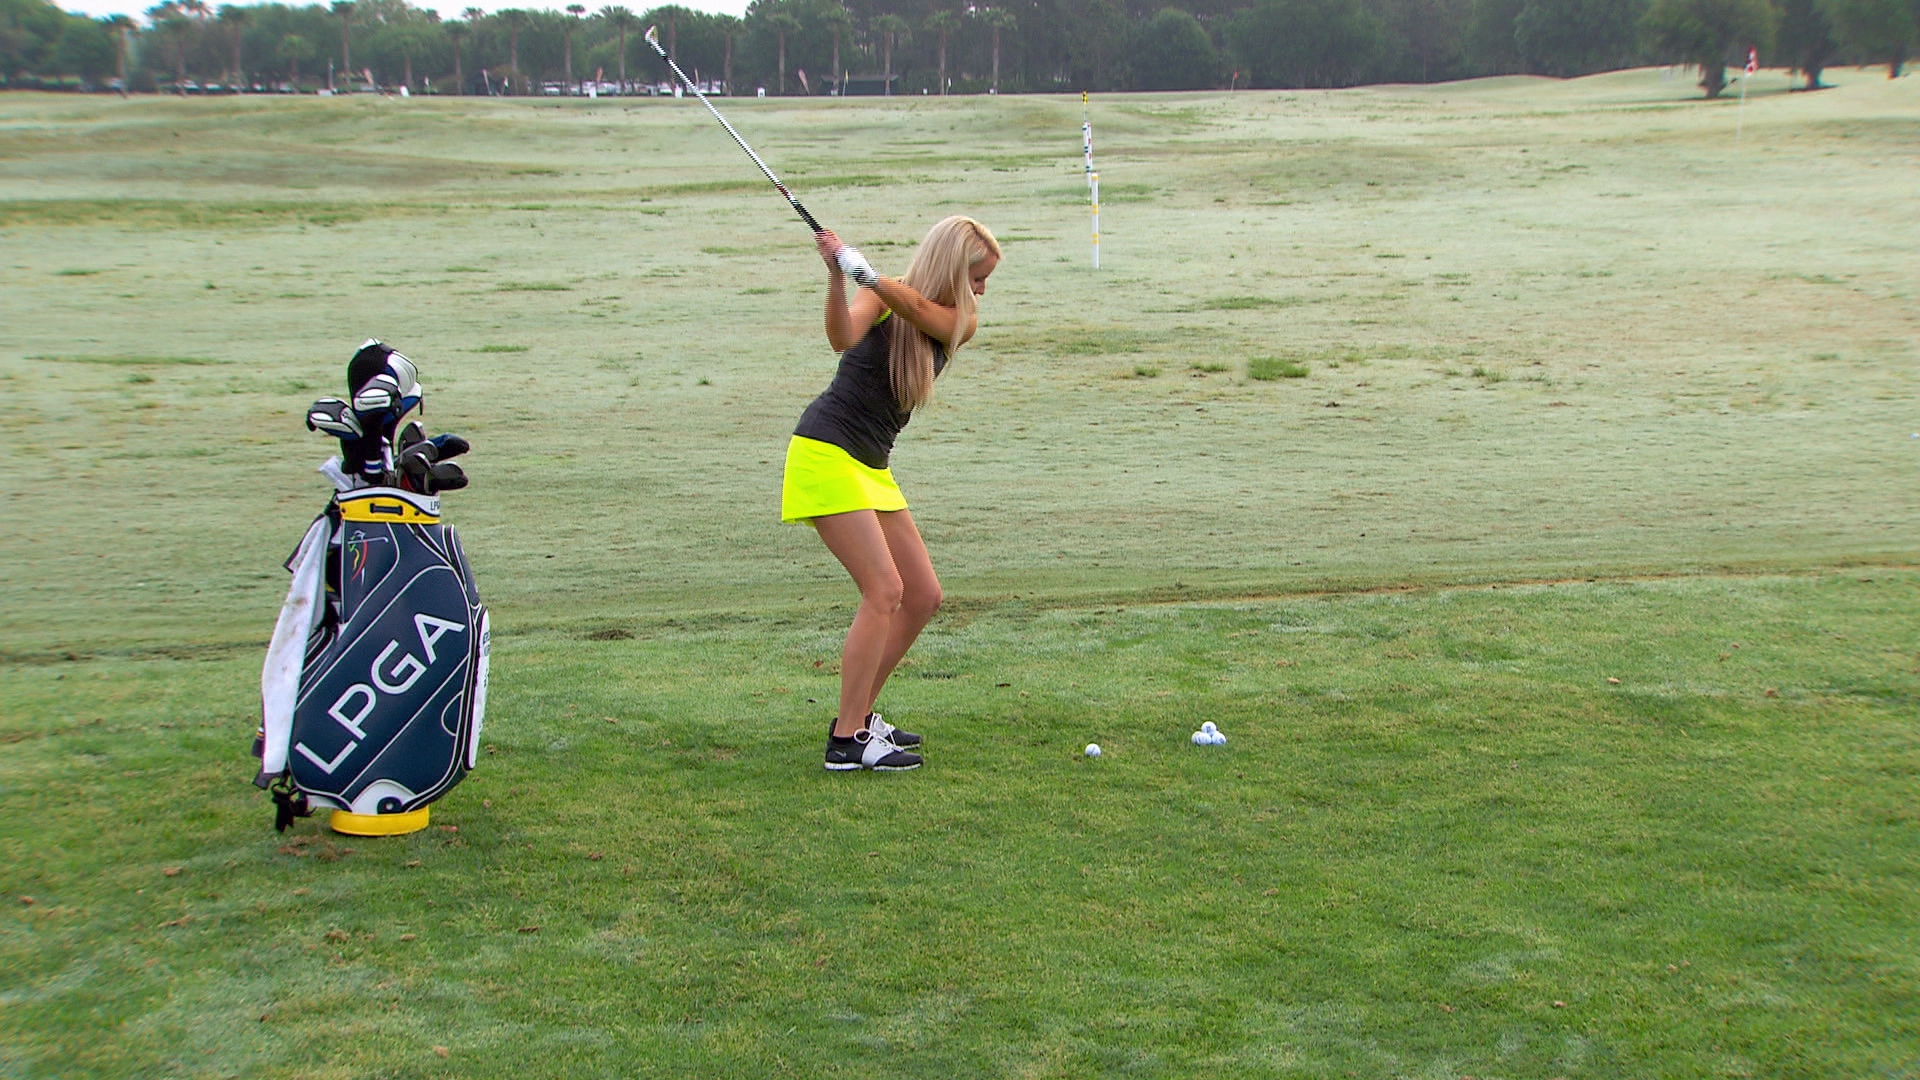 How to make golf practice fun to improve game | Golf Channel